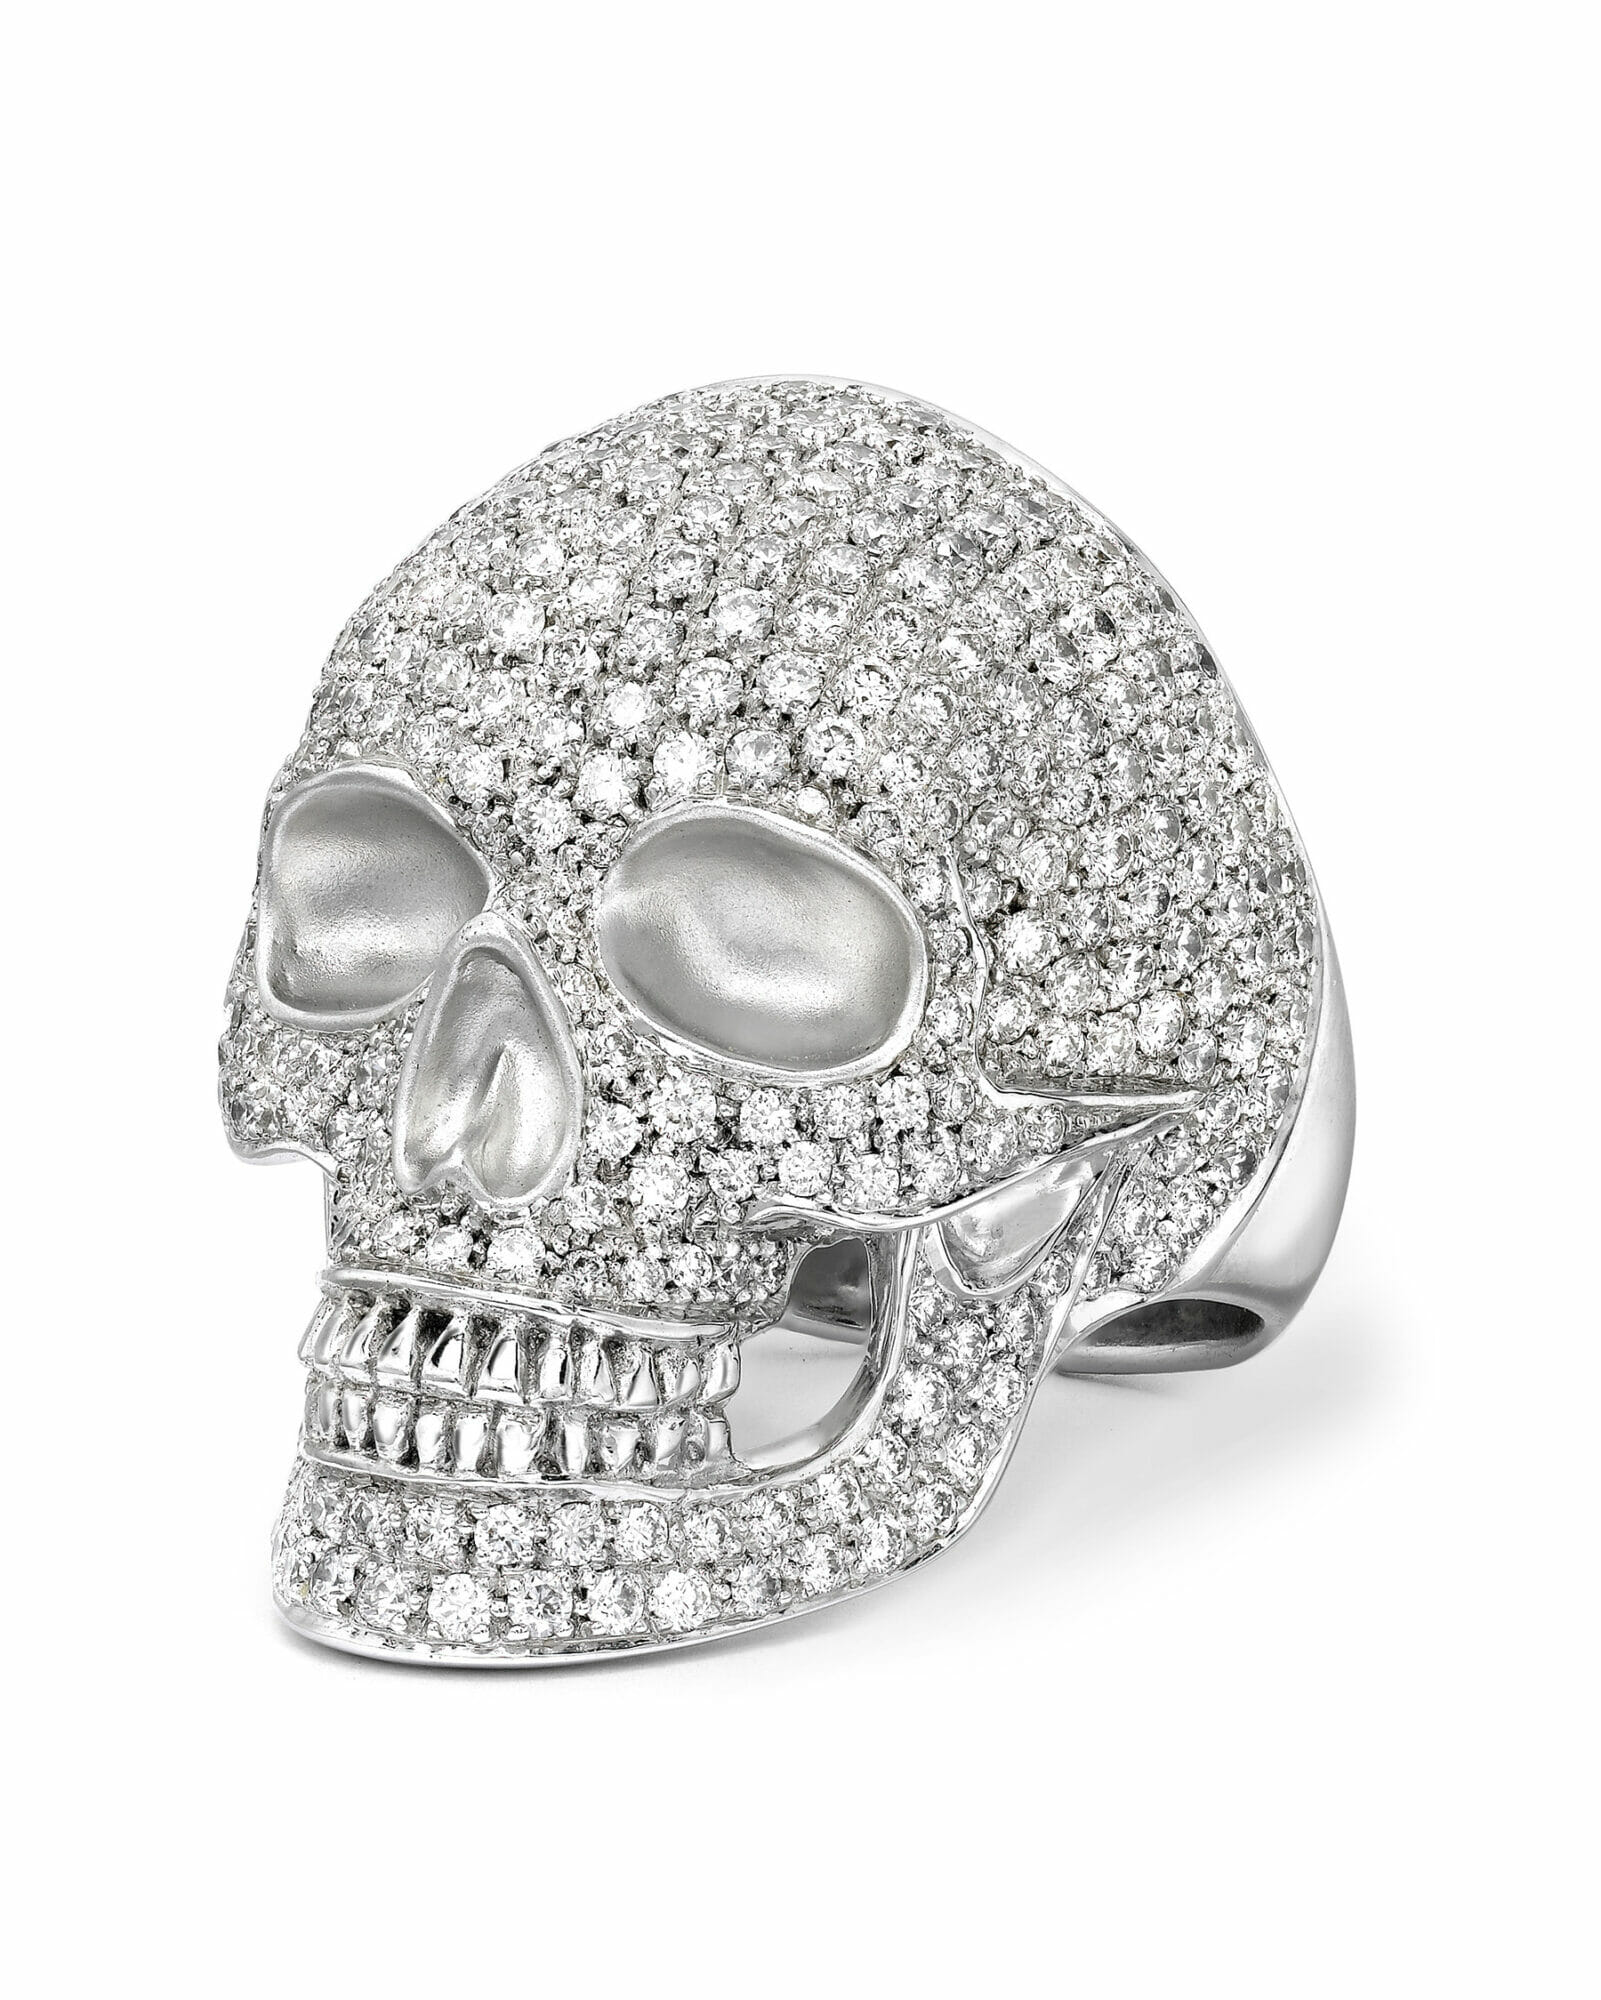 the fennell works british jewelry designers diamonds ring skull